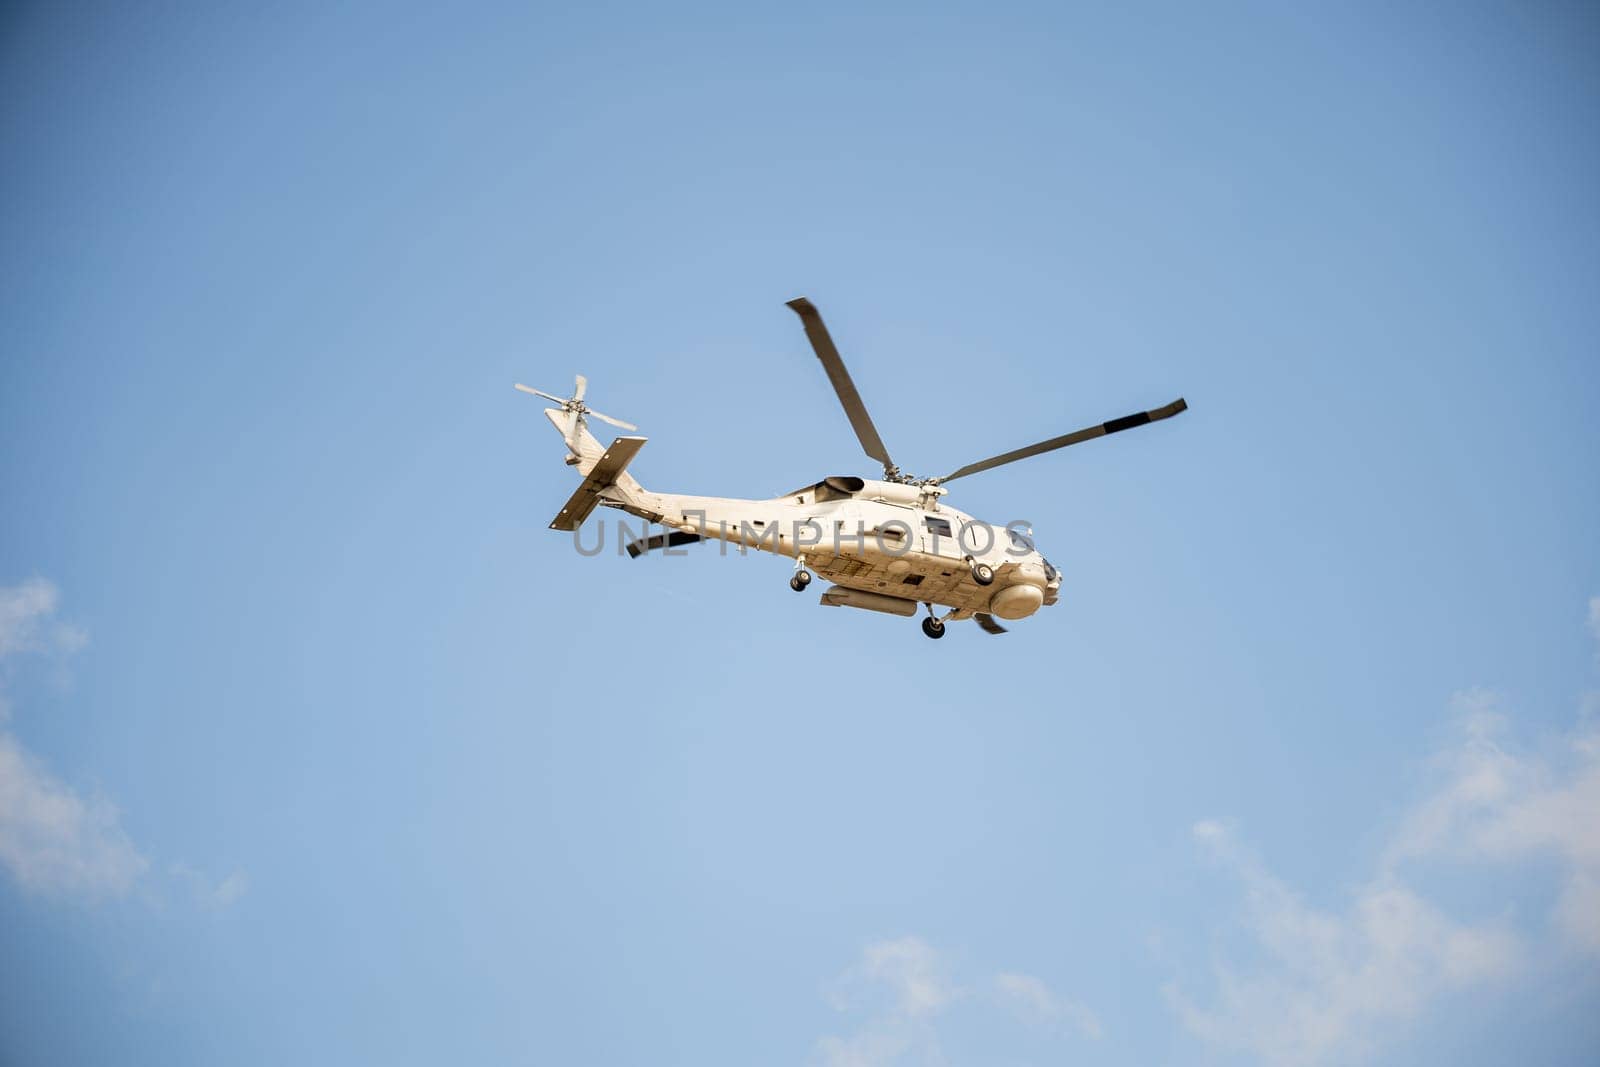 Helicopter in flight against blue sky showcasing modern rescue and transportation technology. New engine hovering capabilities. Pilot manages small aircraft's speed and angles.